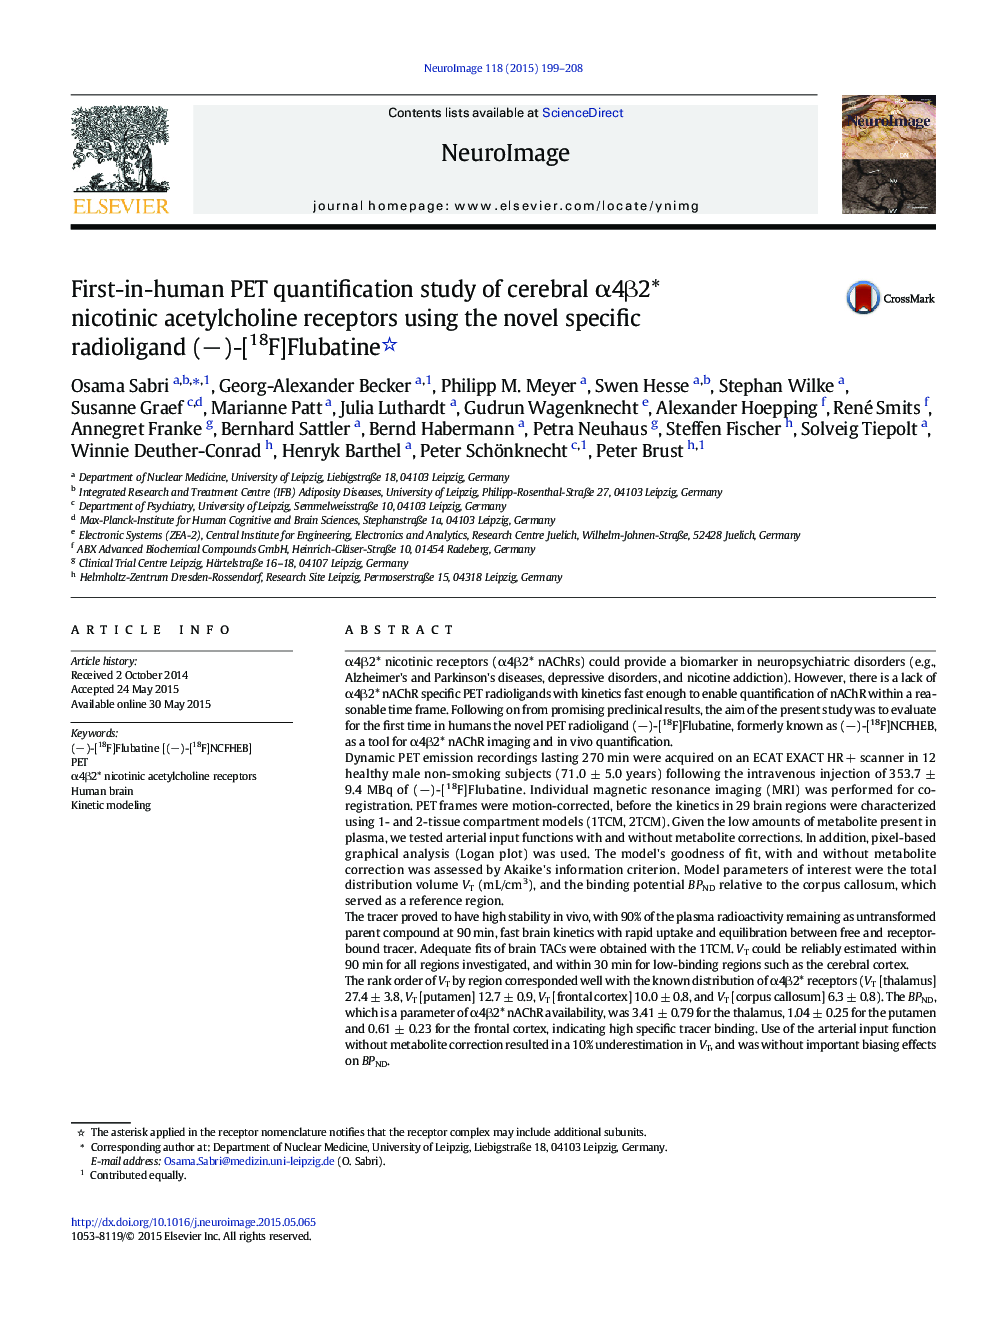 First-in-human PET quantification study of cerebral Î±4Î²2* nicotinic acetylcholine receptors using the novel specific radioligand (â)-[18F]Flubatine